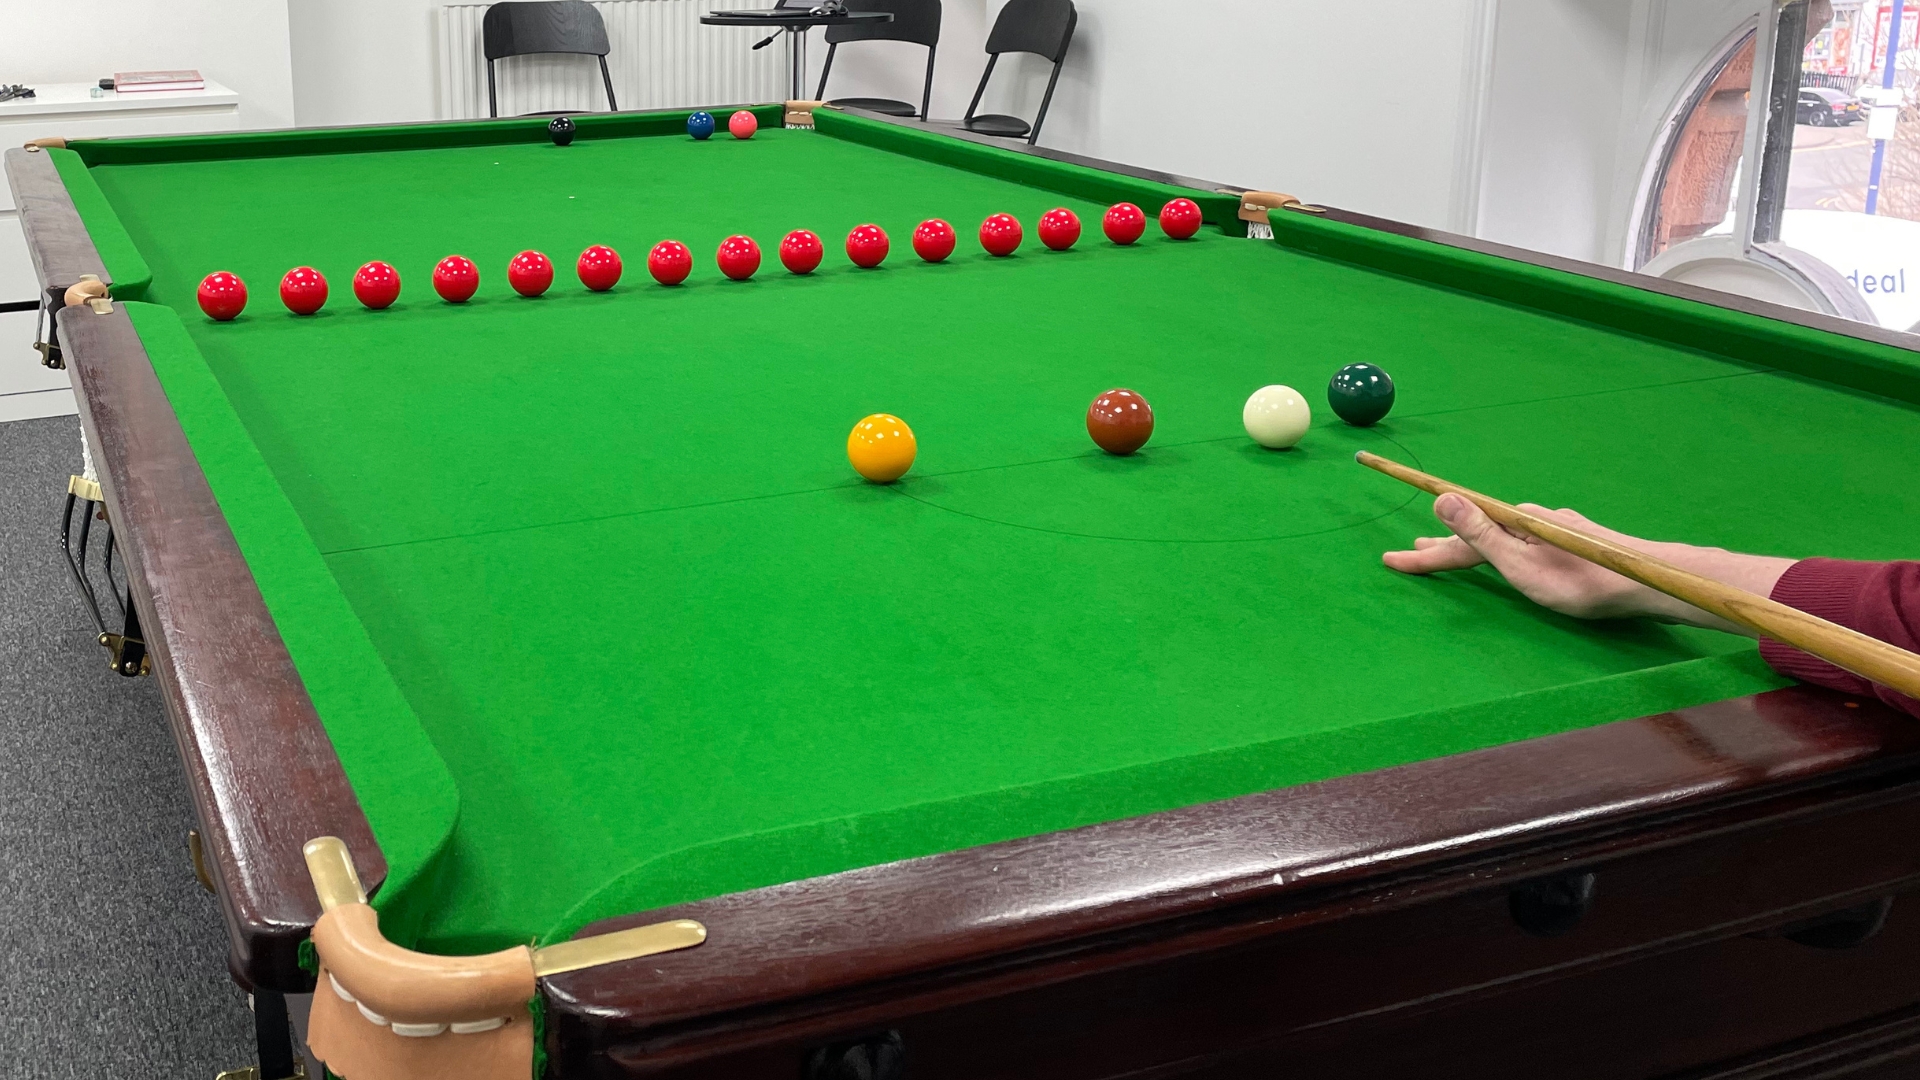 Snooker Practice: 5 drills to improve your short range positional play